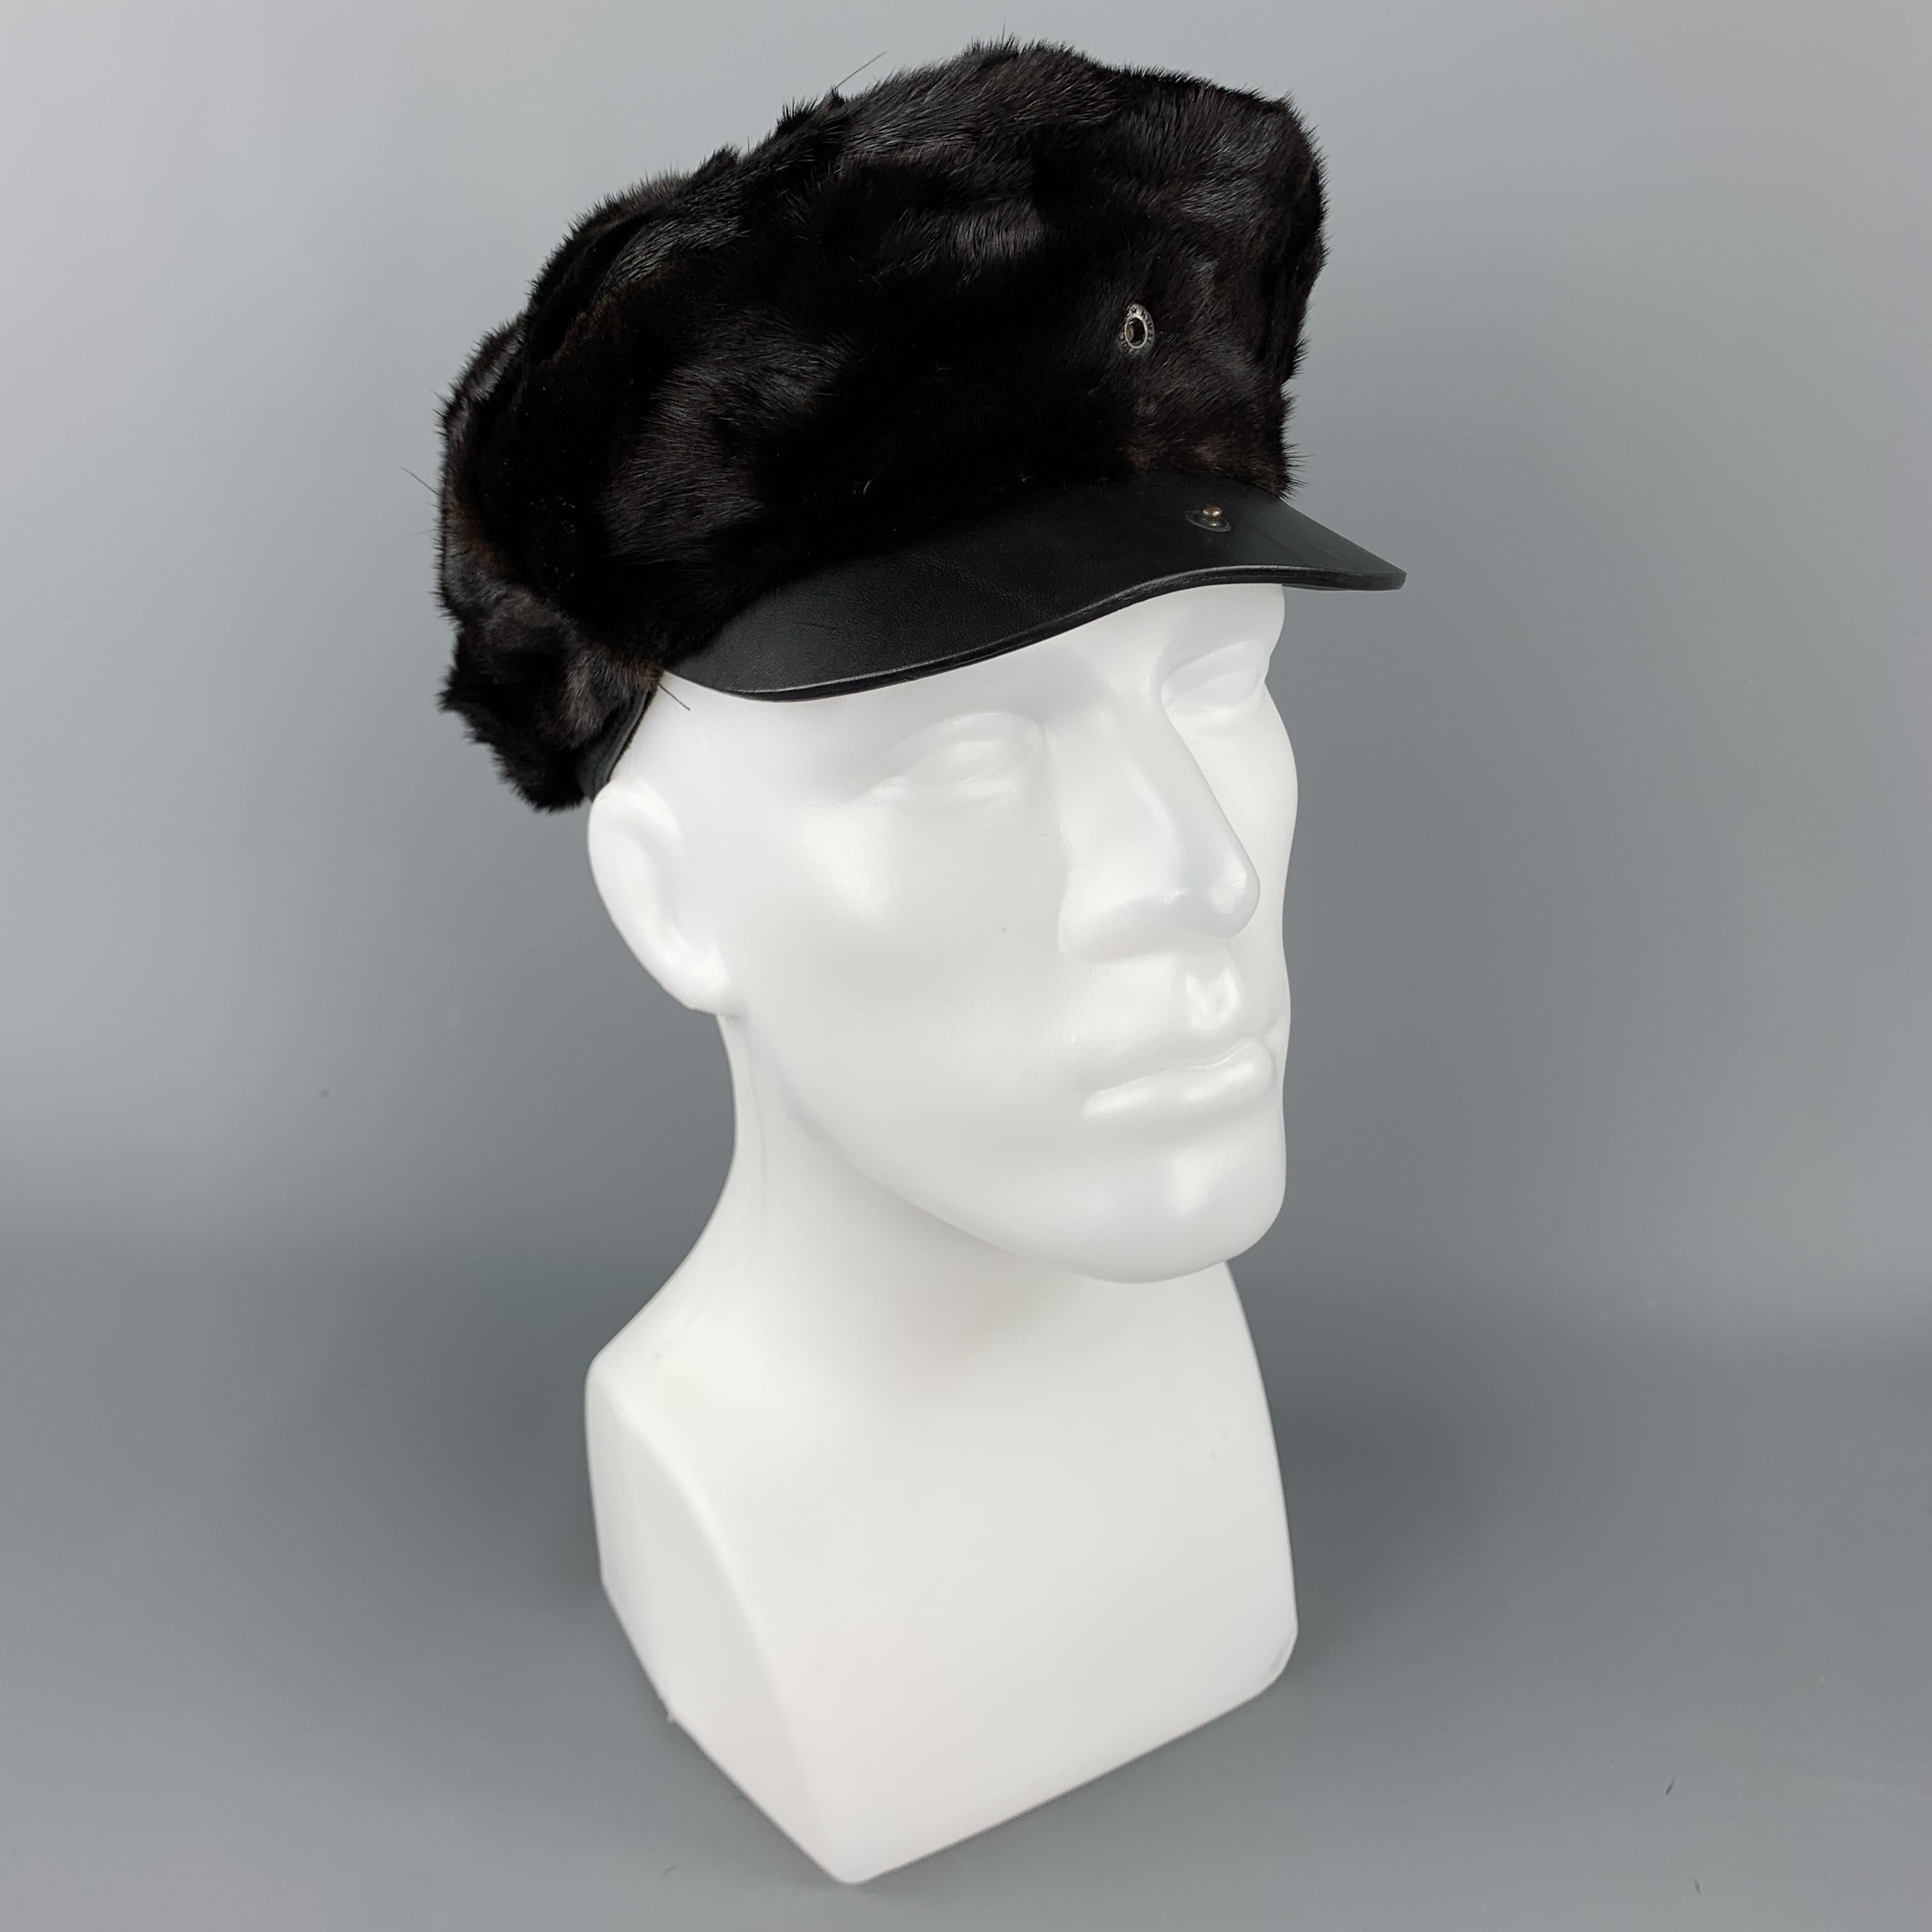 BURBERRY PRORSUM hat comes in a brown textured mink material, with a snap at brim, a solid black leather trim, and a quilted lining. As is. 

Very Good Pre-Owned Condition.
Marked: no size

Measurements:

Opening: 21.5 in.
Brim: 1.5 in.
Height: 3 in.